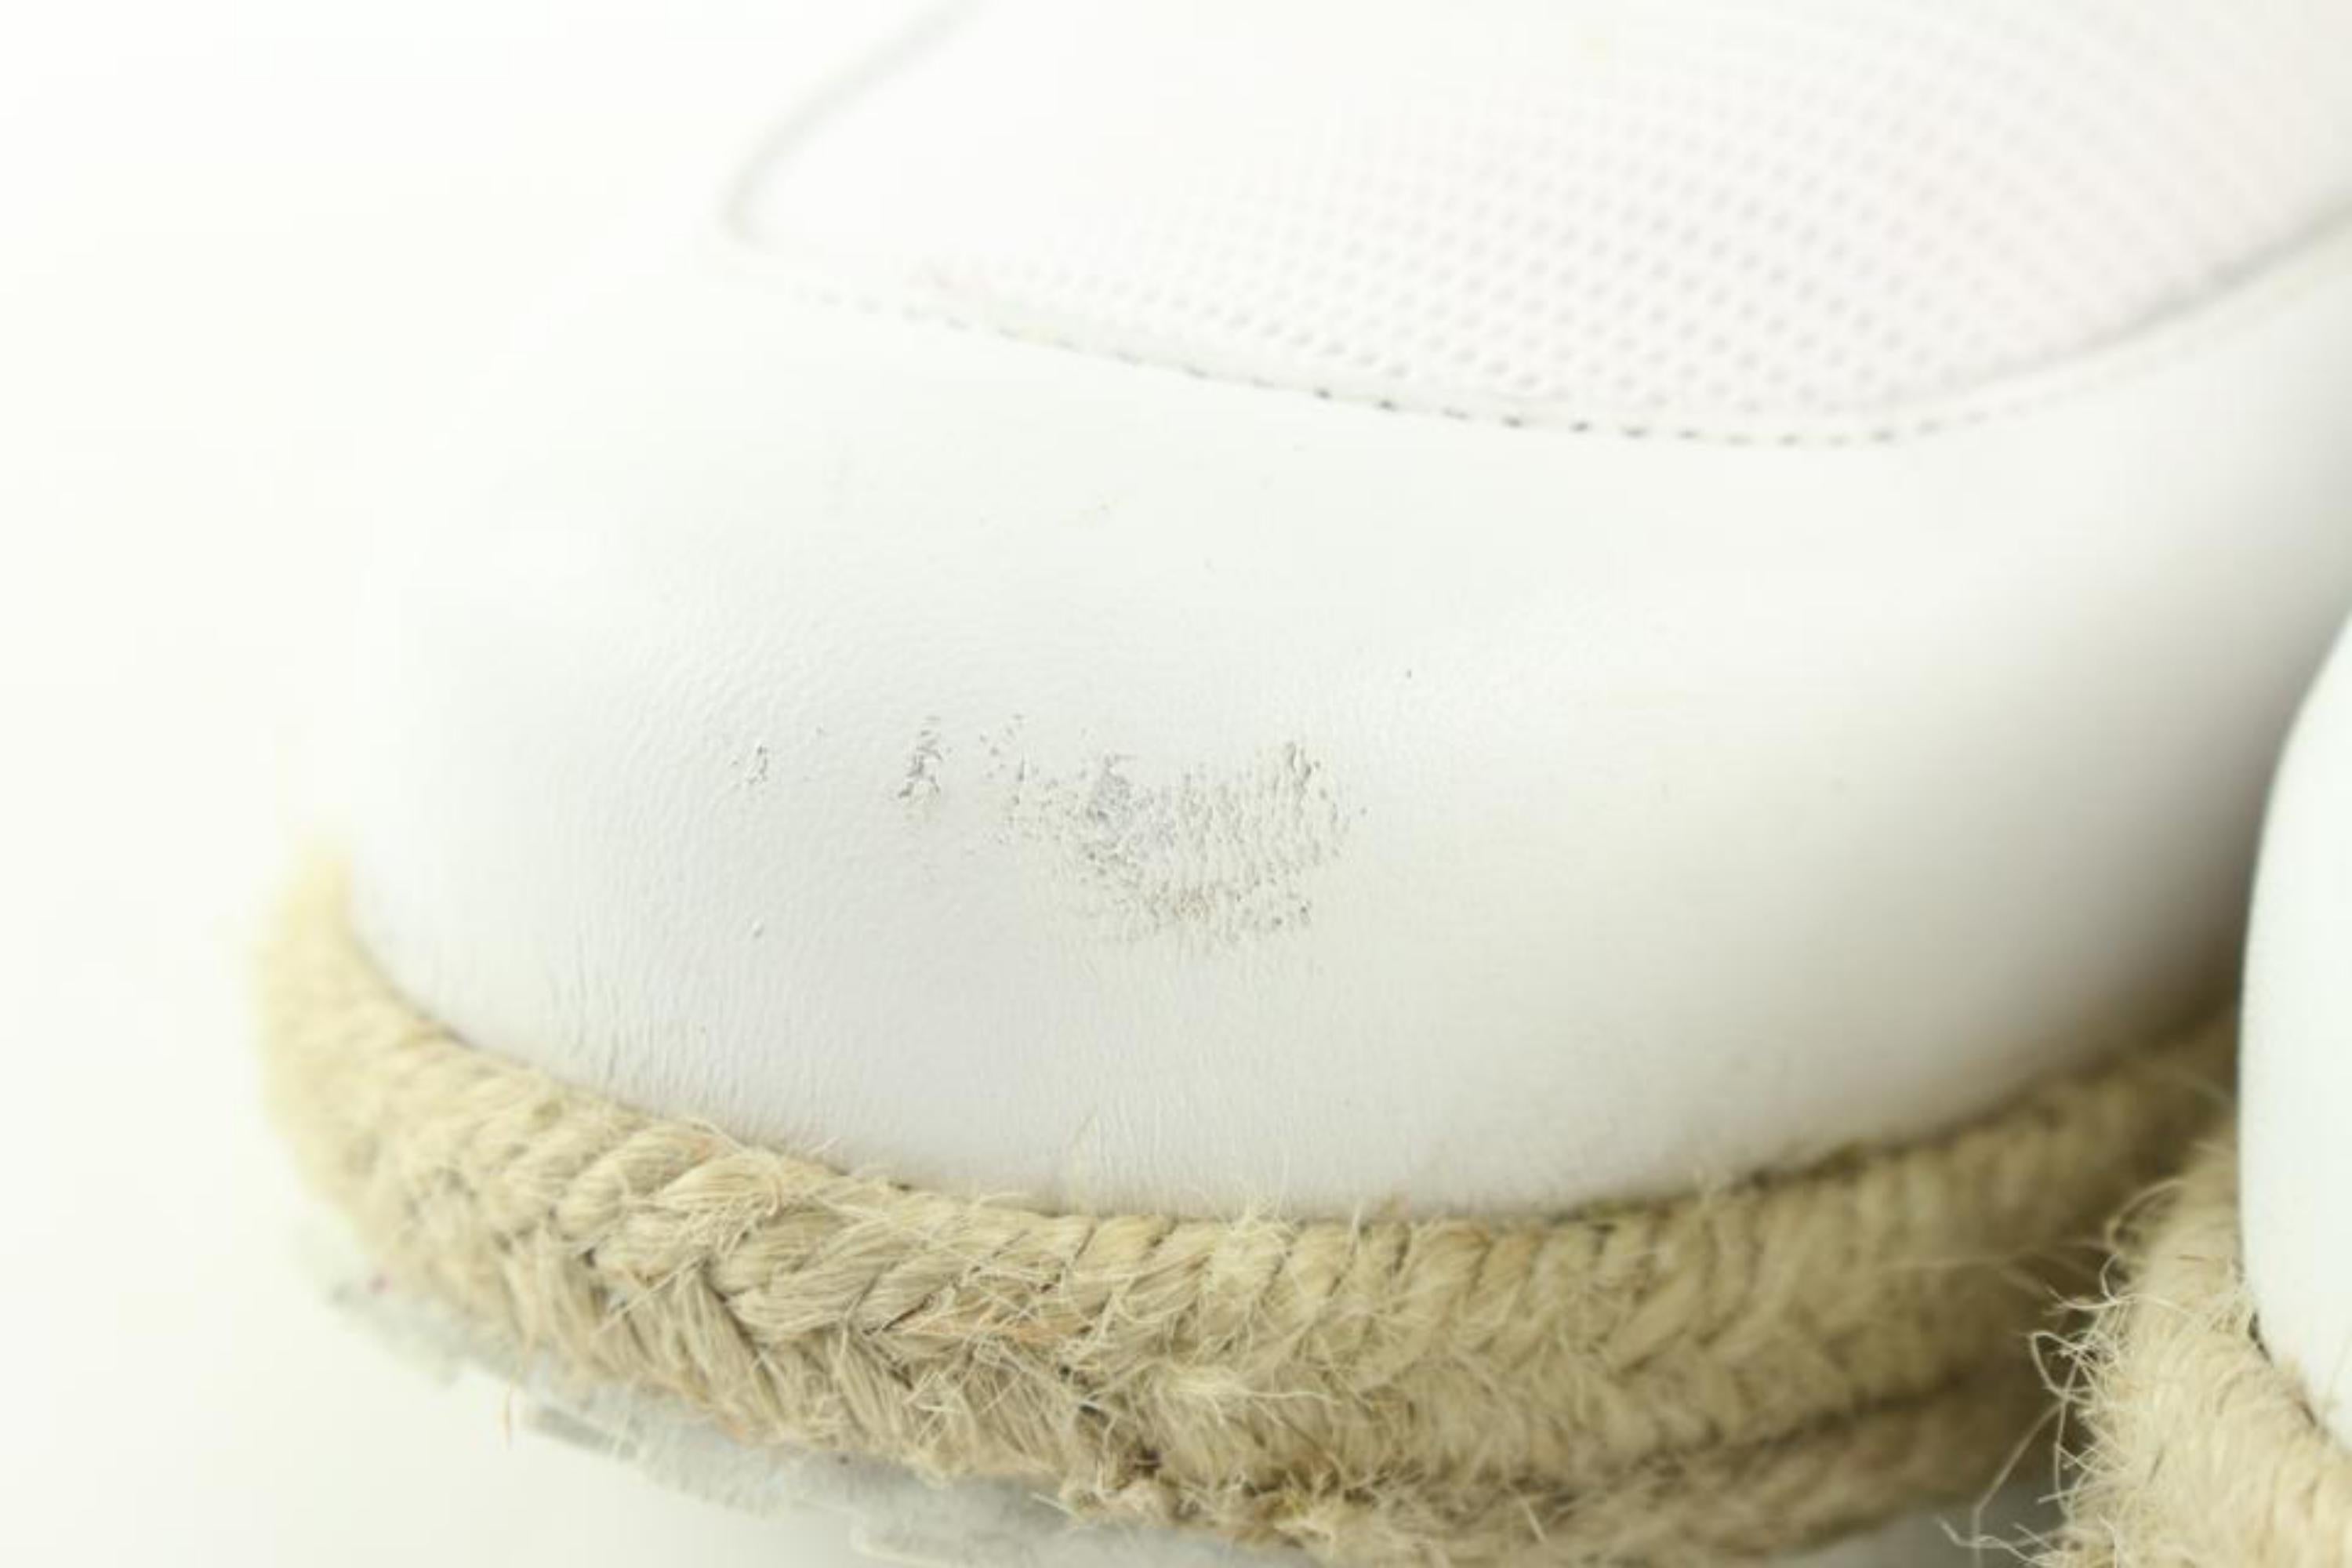 Moschino Women's 37 White x Fuchsia Love Heart Espadrille Sneaker 1224mo32 In Good Condition For Sale In Dix hills, NY